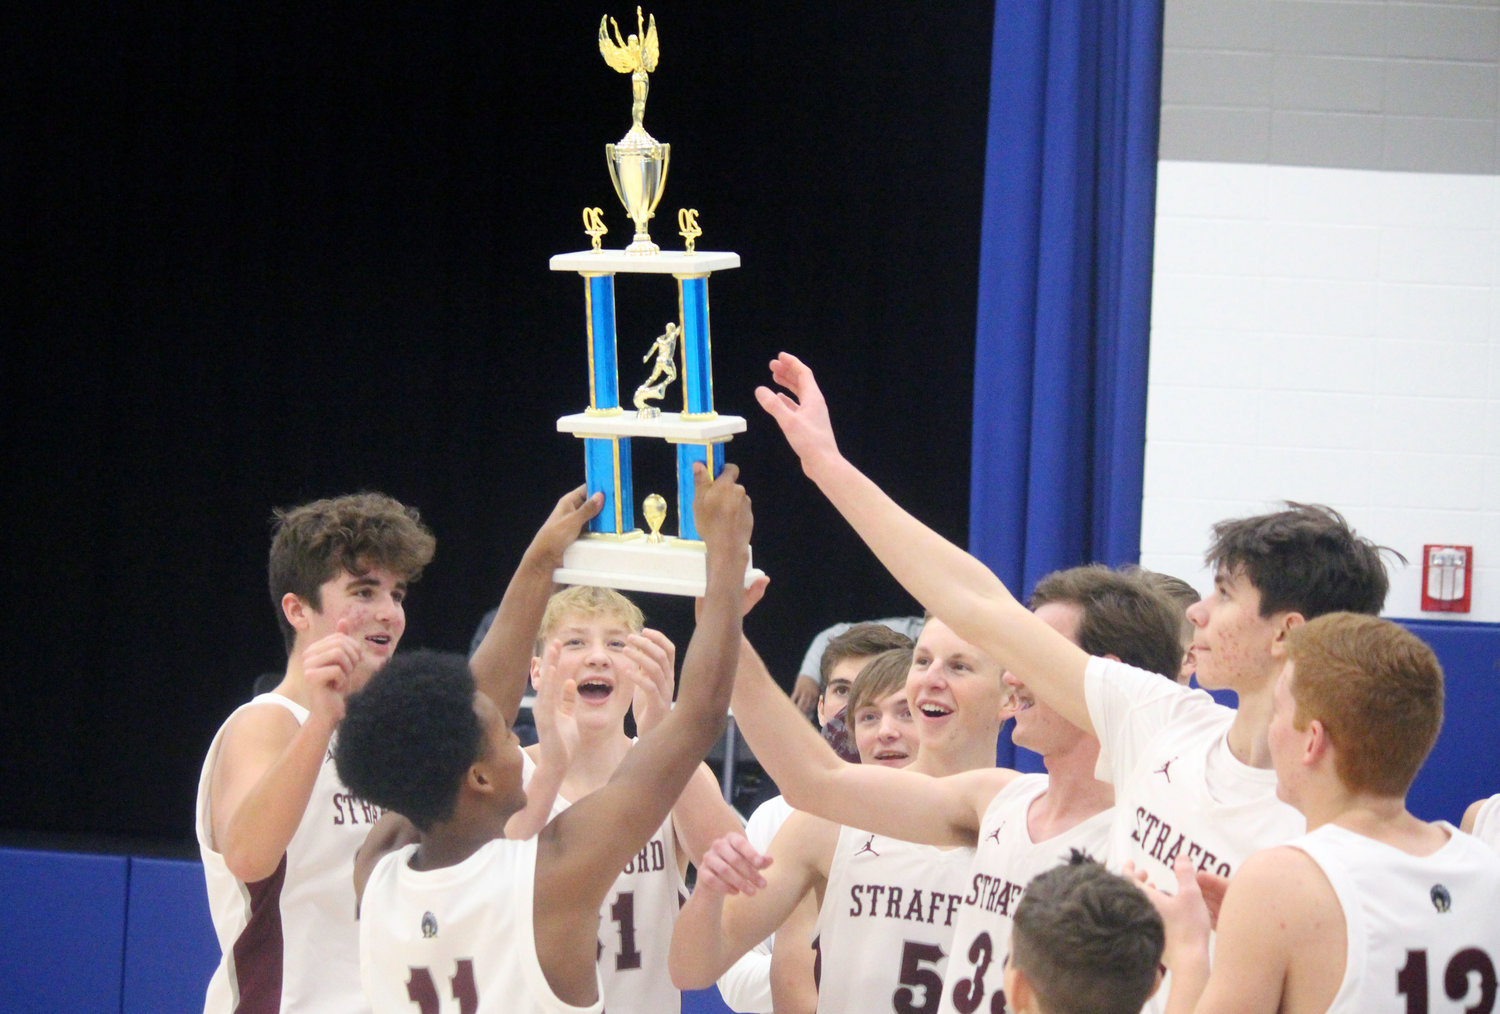 Strafford players lift the fifth-place trophy at Greenwood High School after defeating Bolivar in the 2020 5th place game.